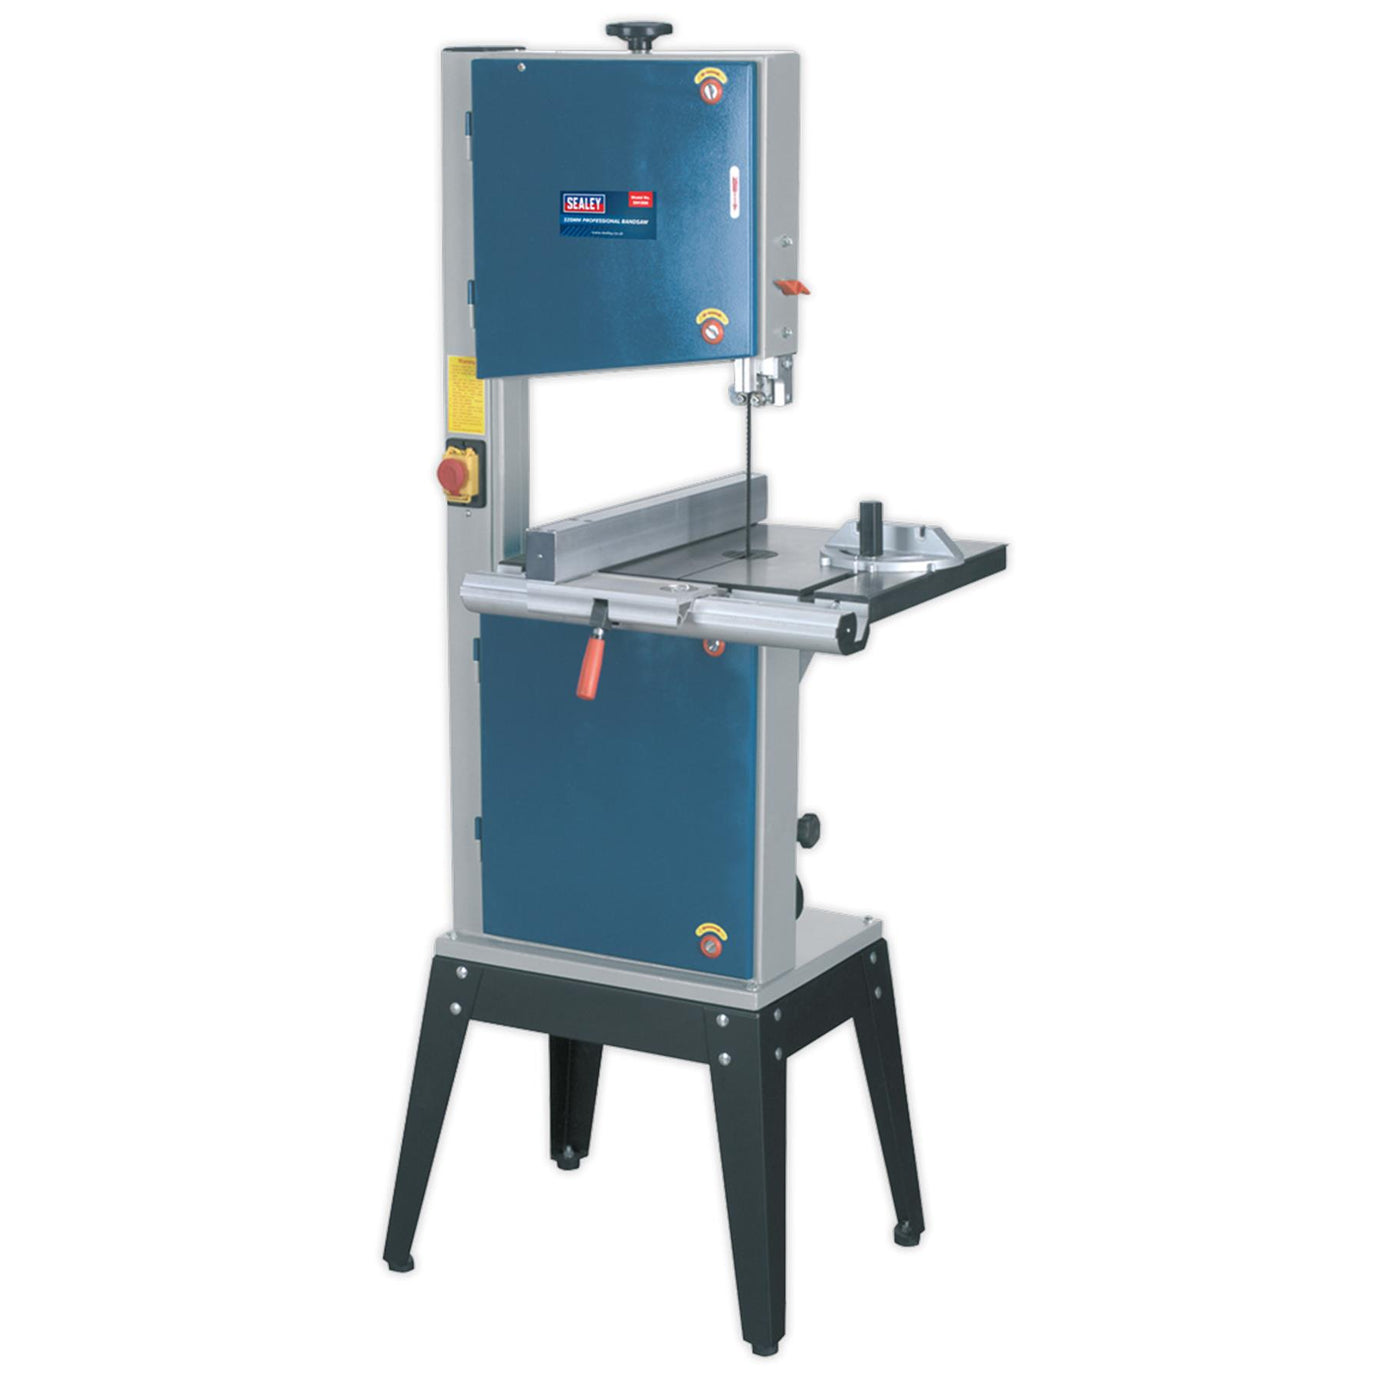 Sealey Professional Bandsaw 335mm  For Cutting wood and plastics